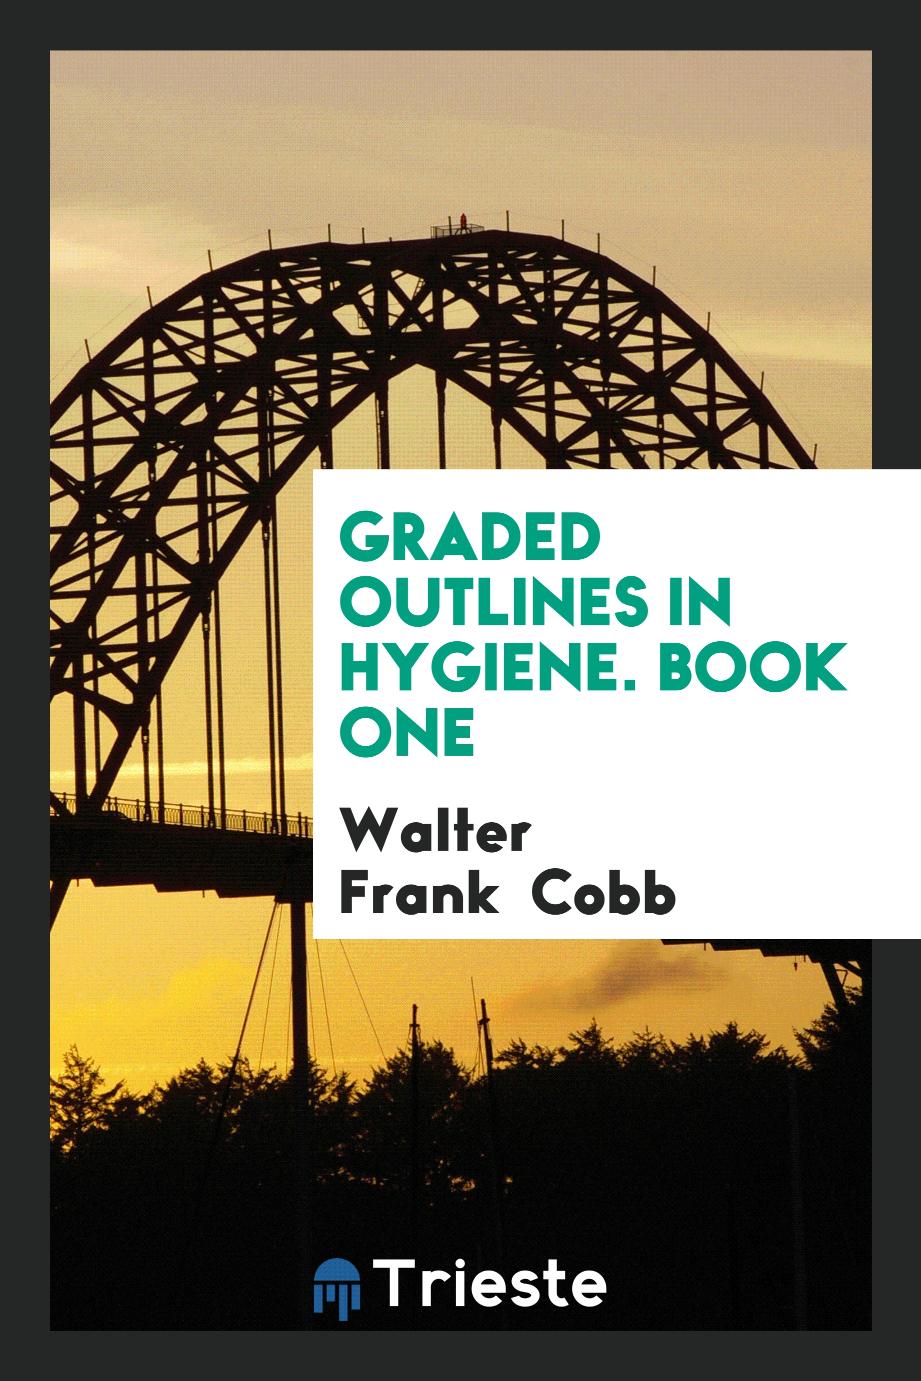 Graded Outlines in Hygiene. Book One